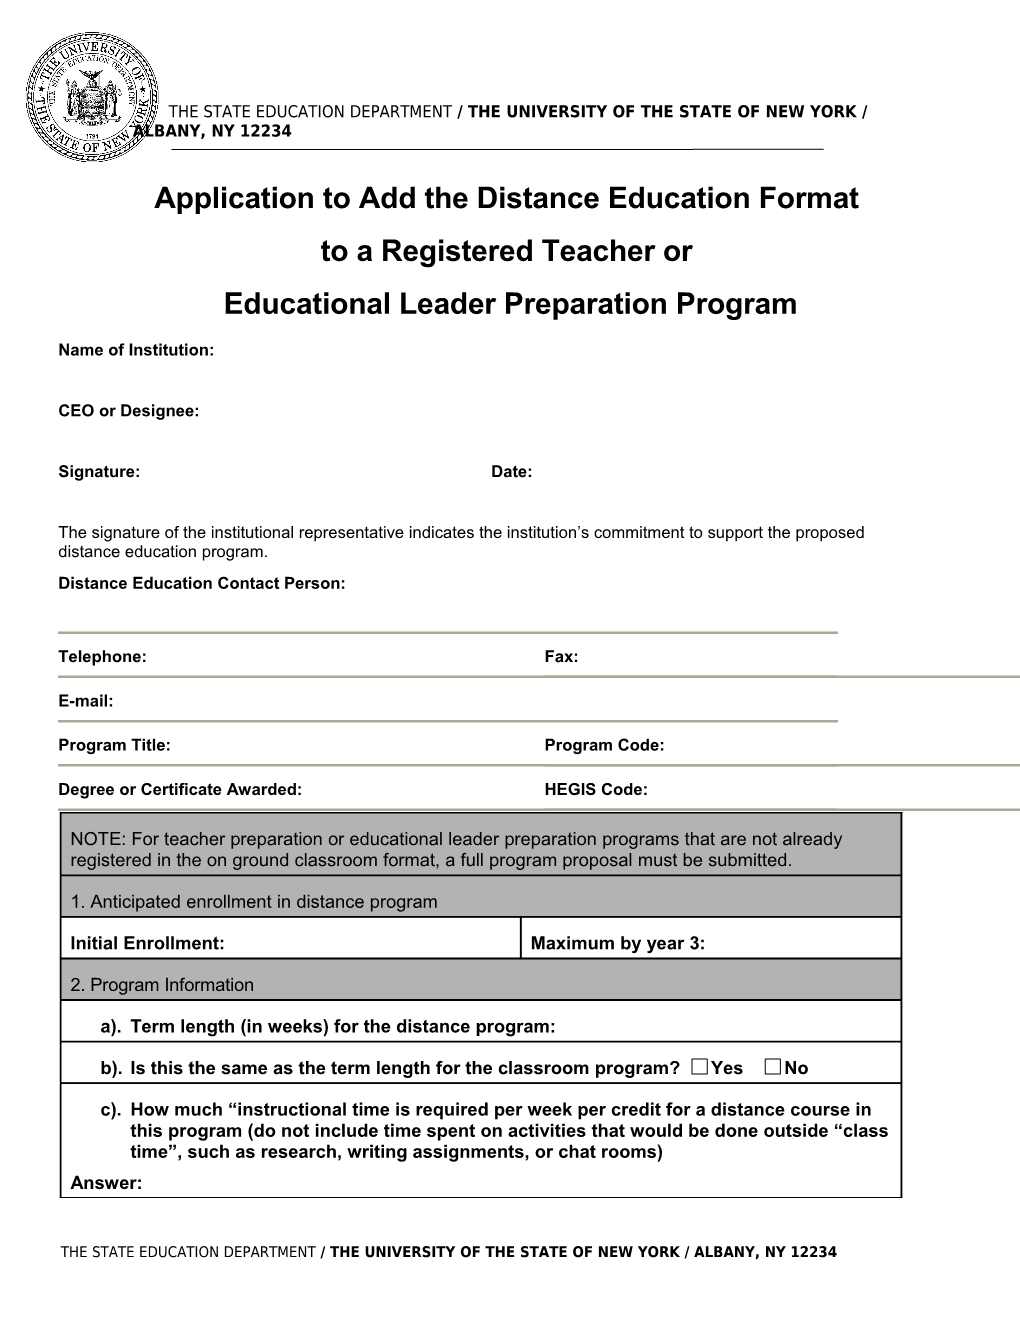 Application for Addition of the Distance Education Format